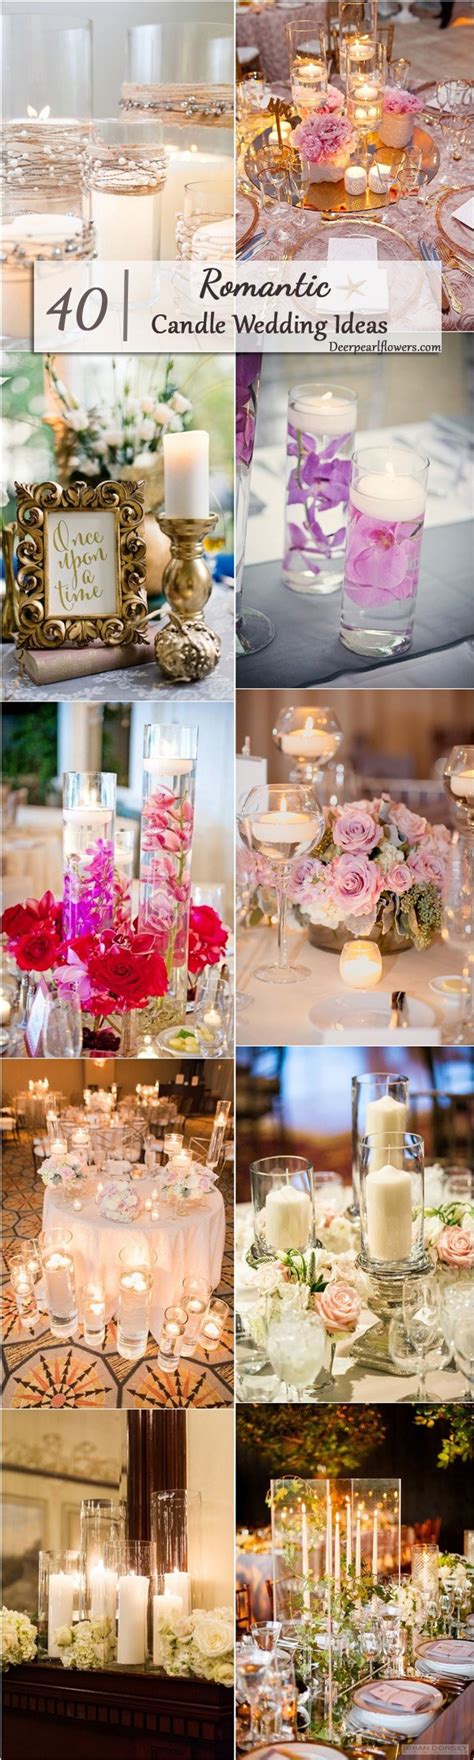 40 Chic Romantic Candle Wedding Centerpieces On A Budget Deer Pearl